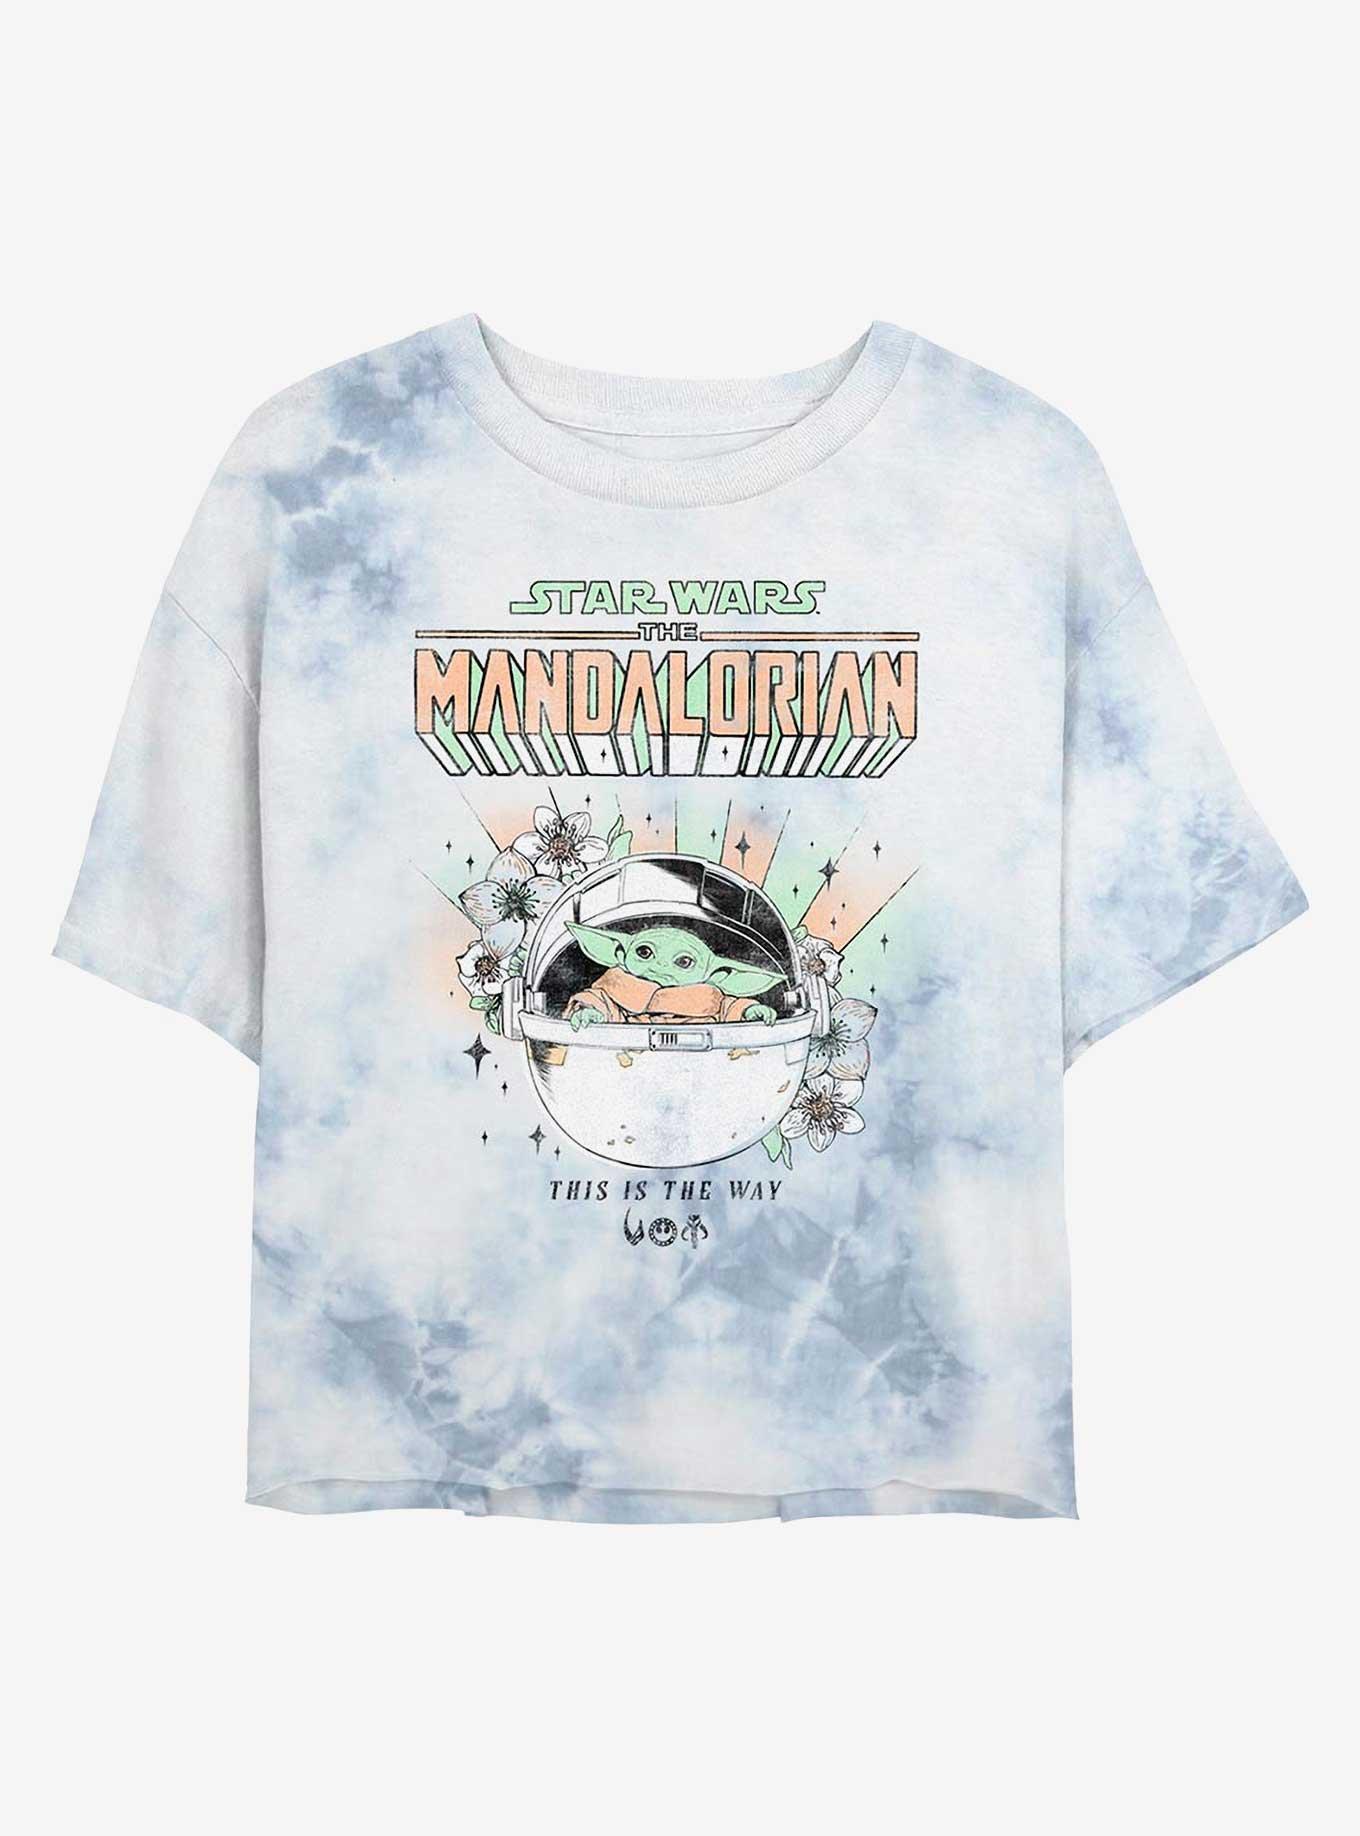 Star Wars The Mandalorian The Child This Is The Way Tie-Dye Womens Crop T-Shirt, , hi-res